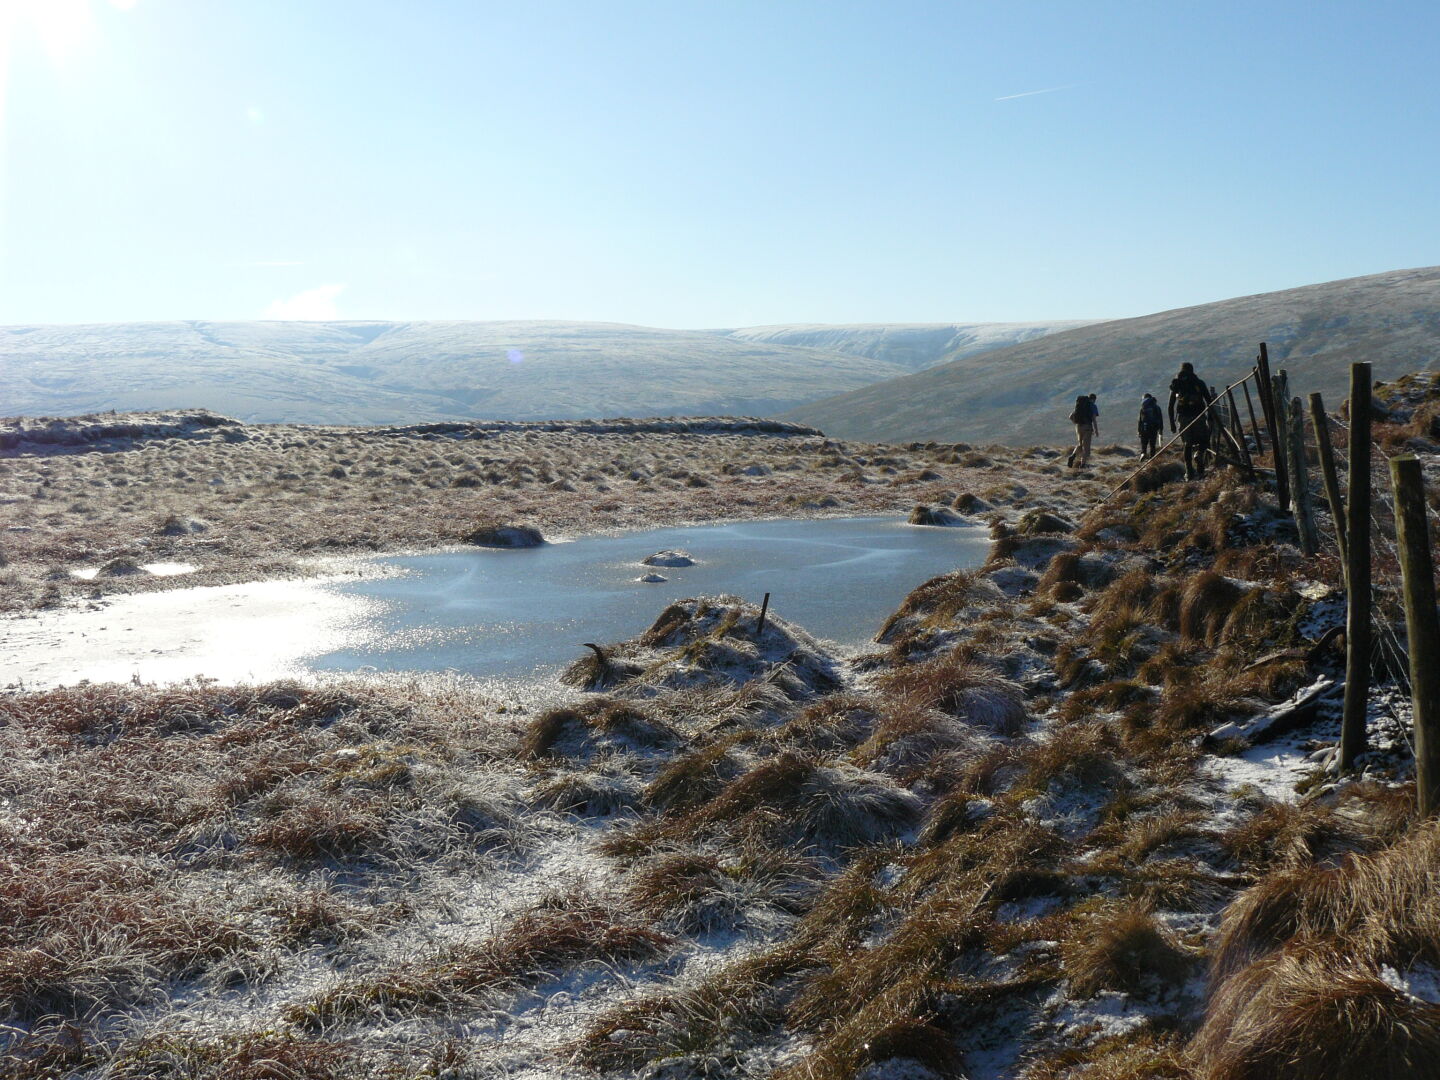 If the moor were not frozen, we would all have wet feet by now.